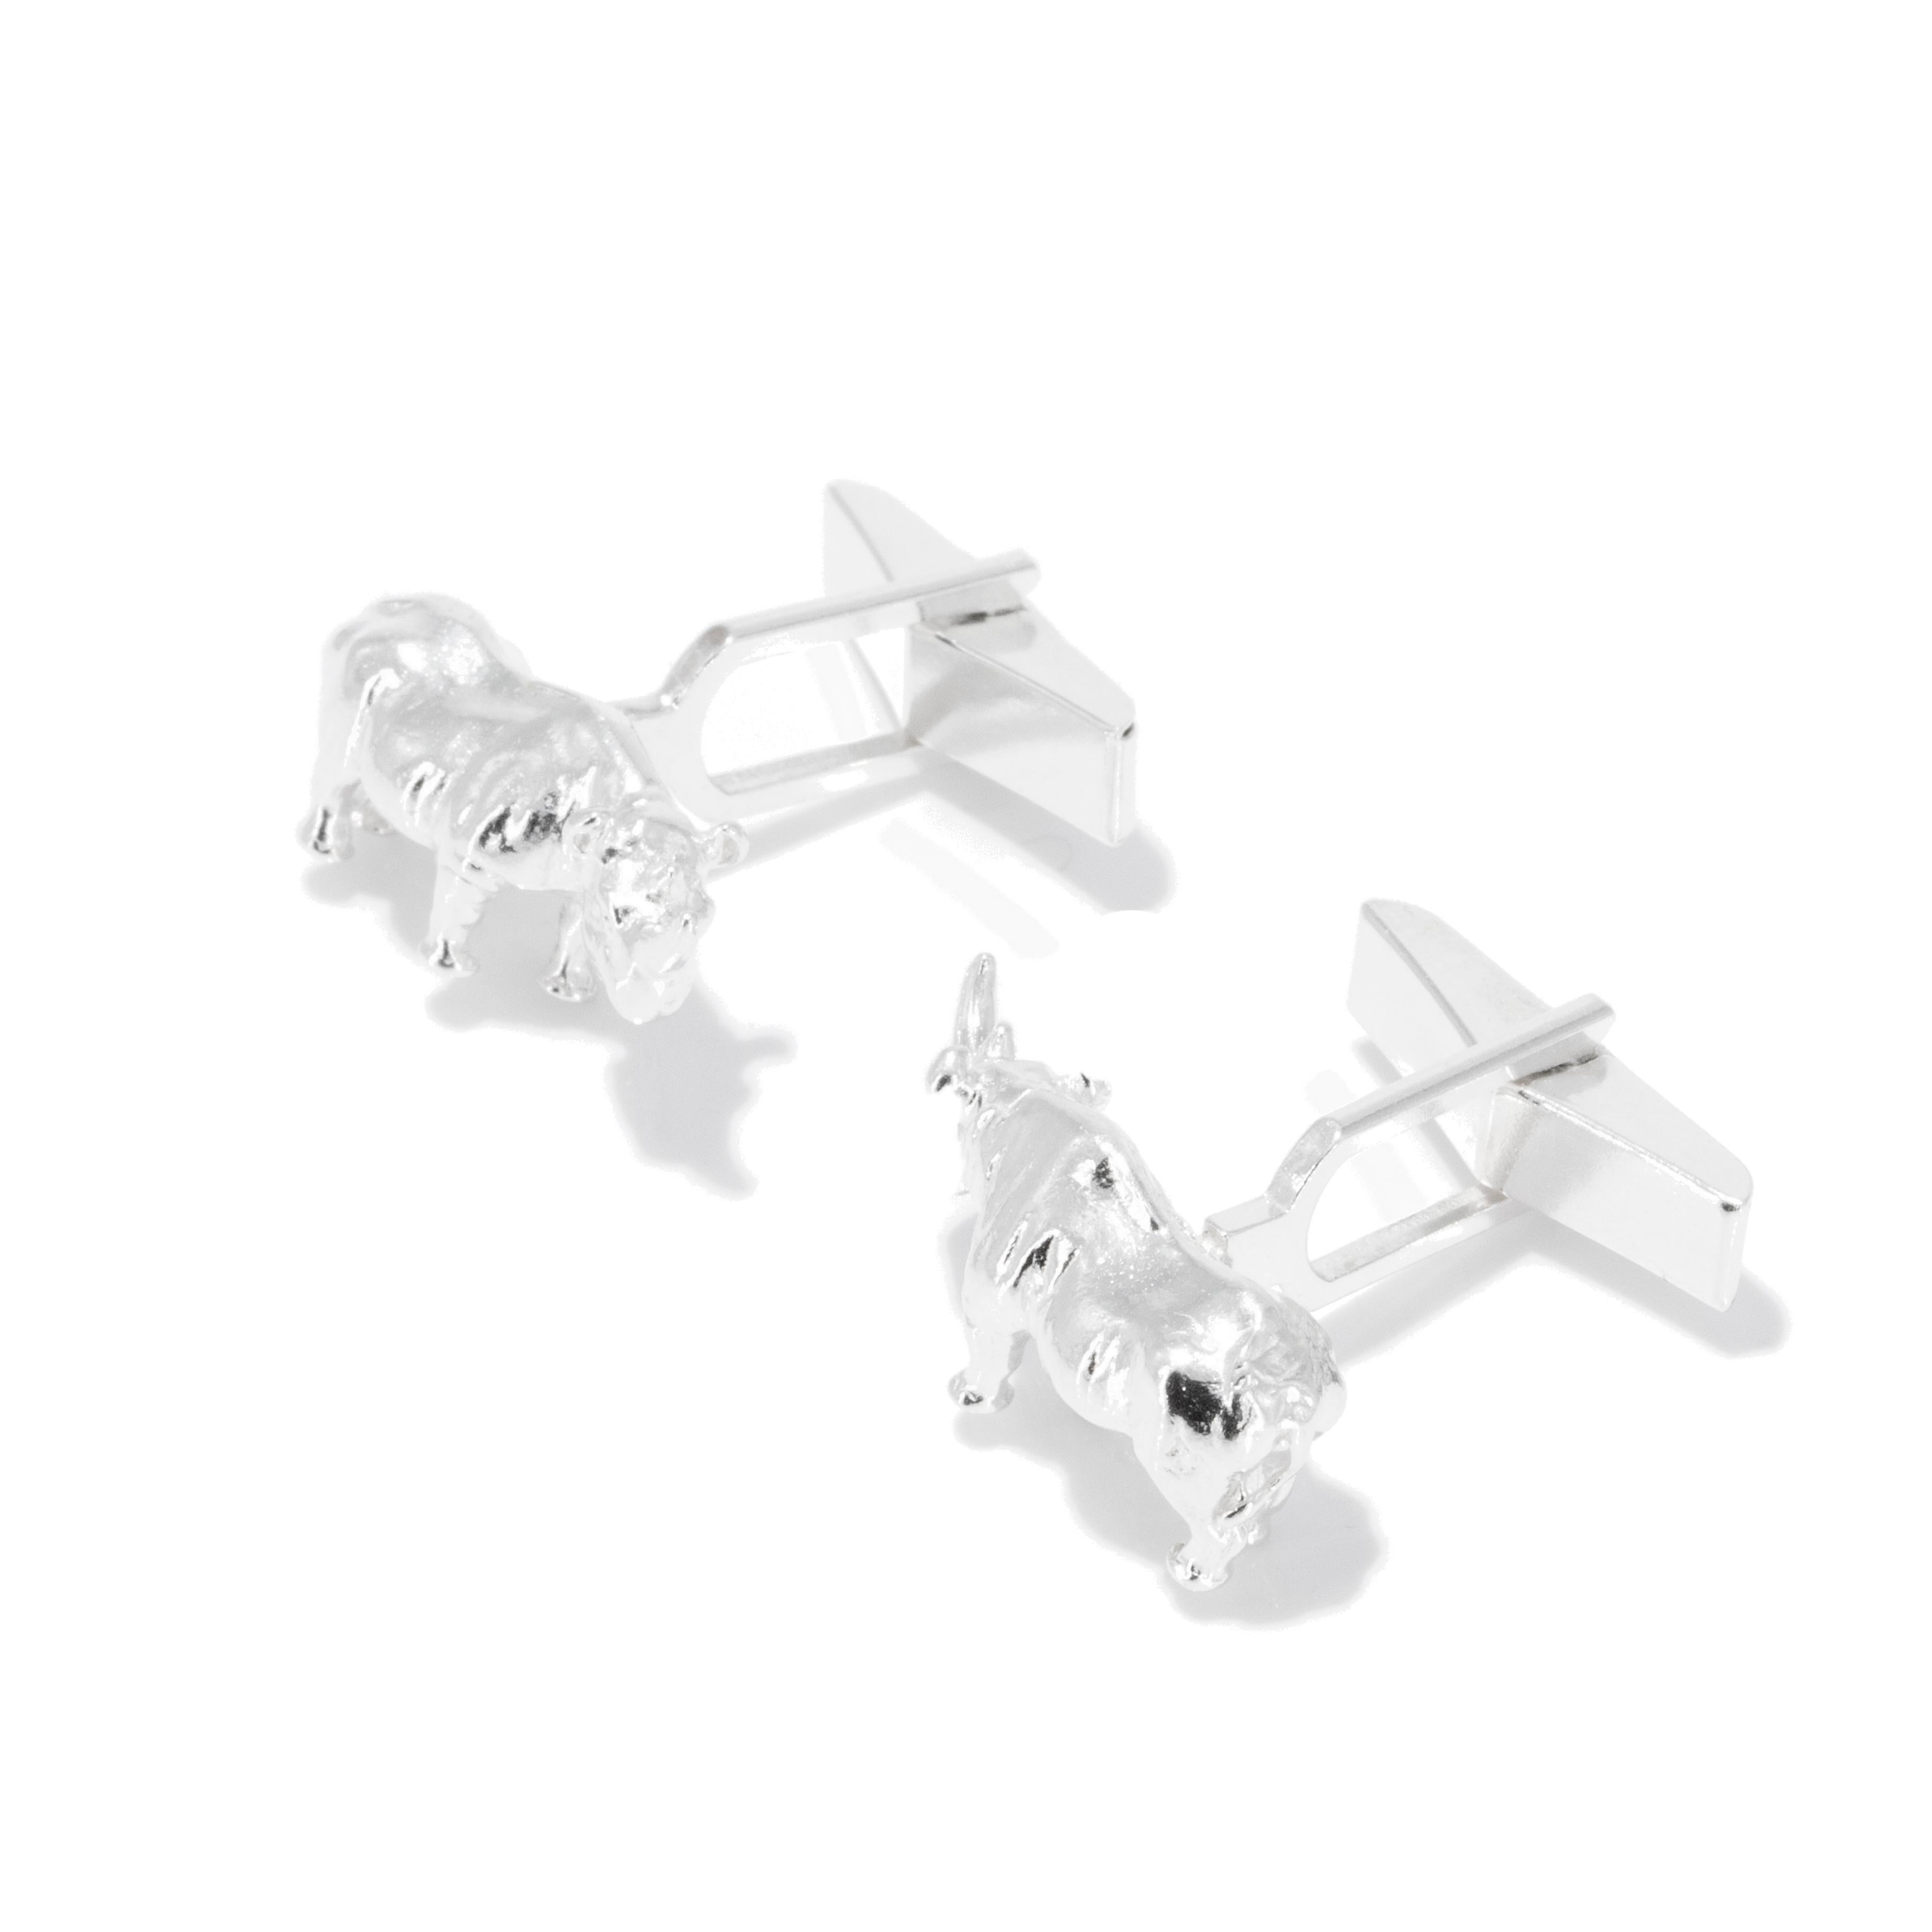 Contemporary Rhinoceros Cufflinks in Solid Sterling Silver For Sale